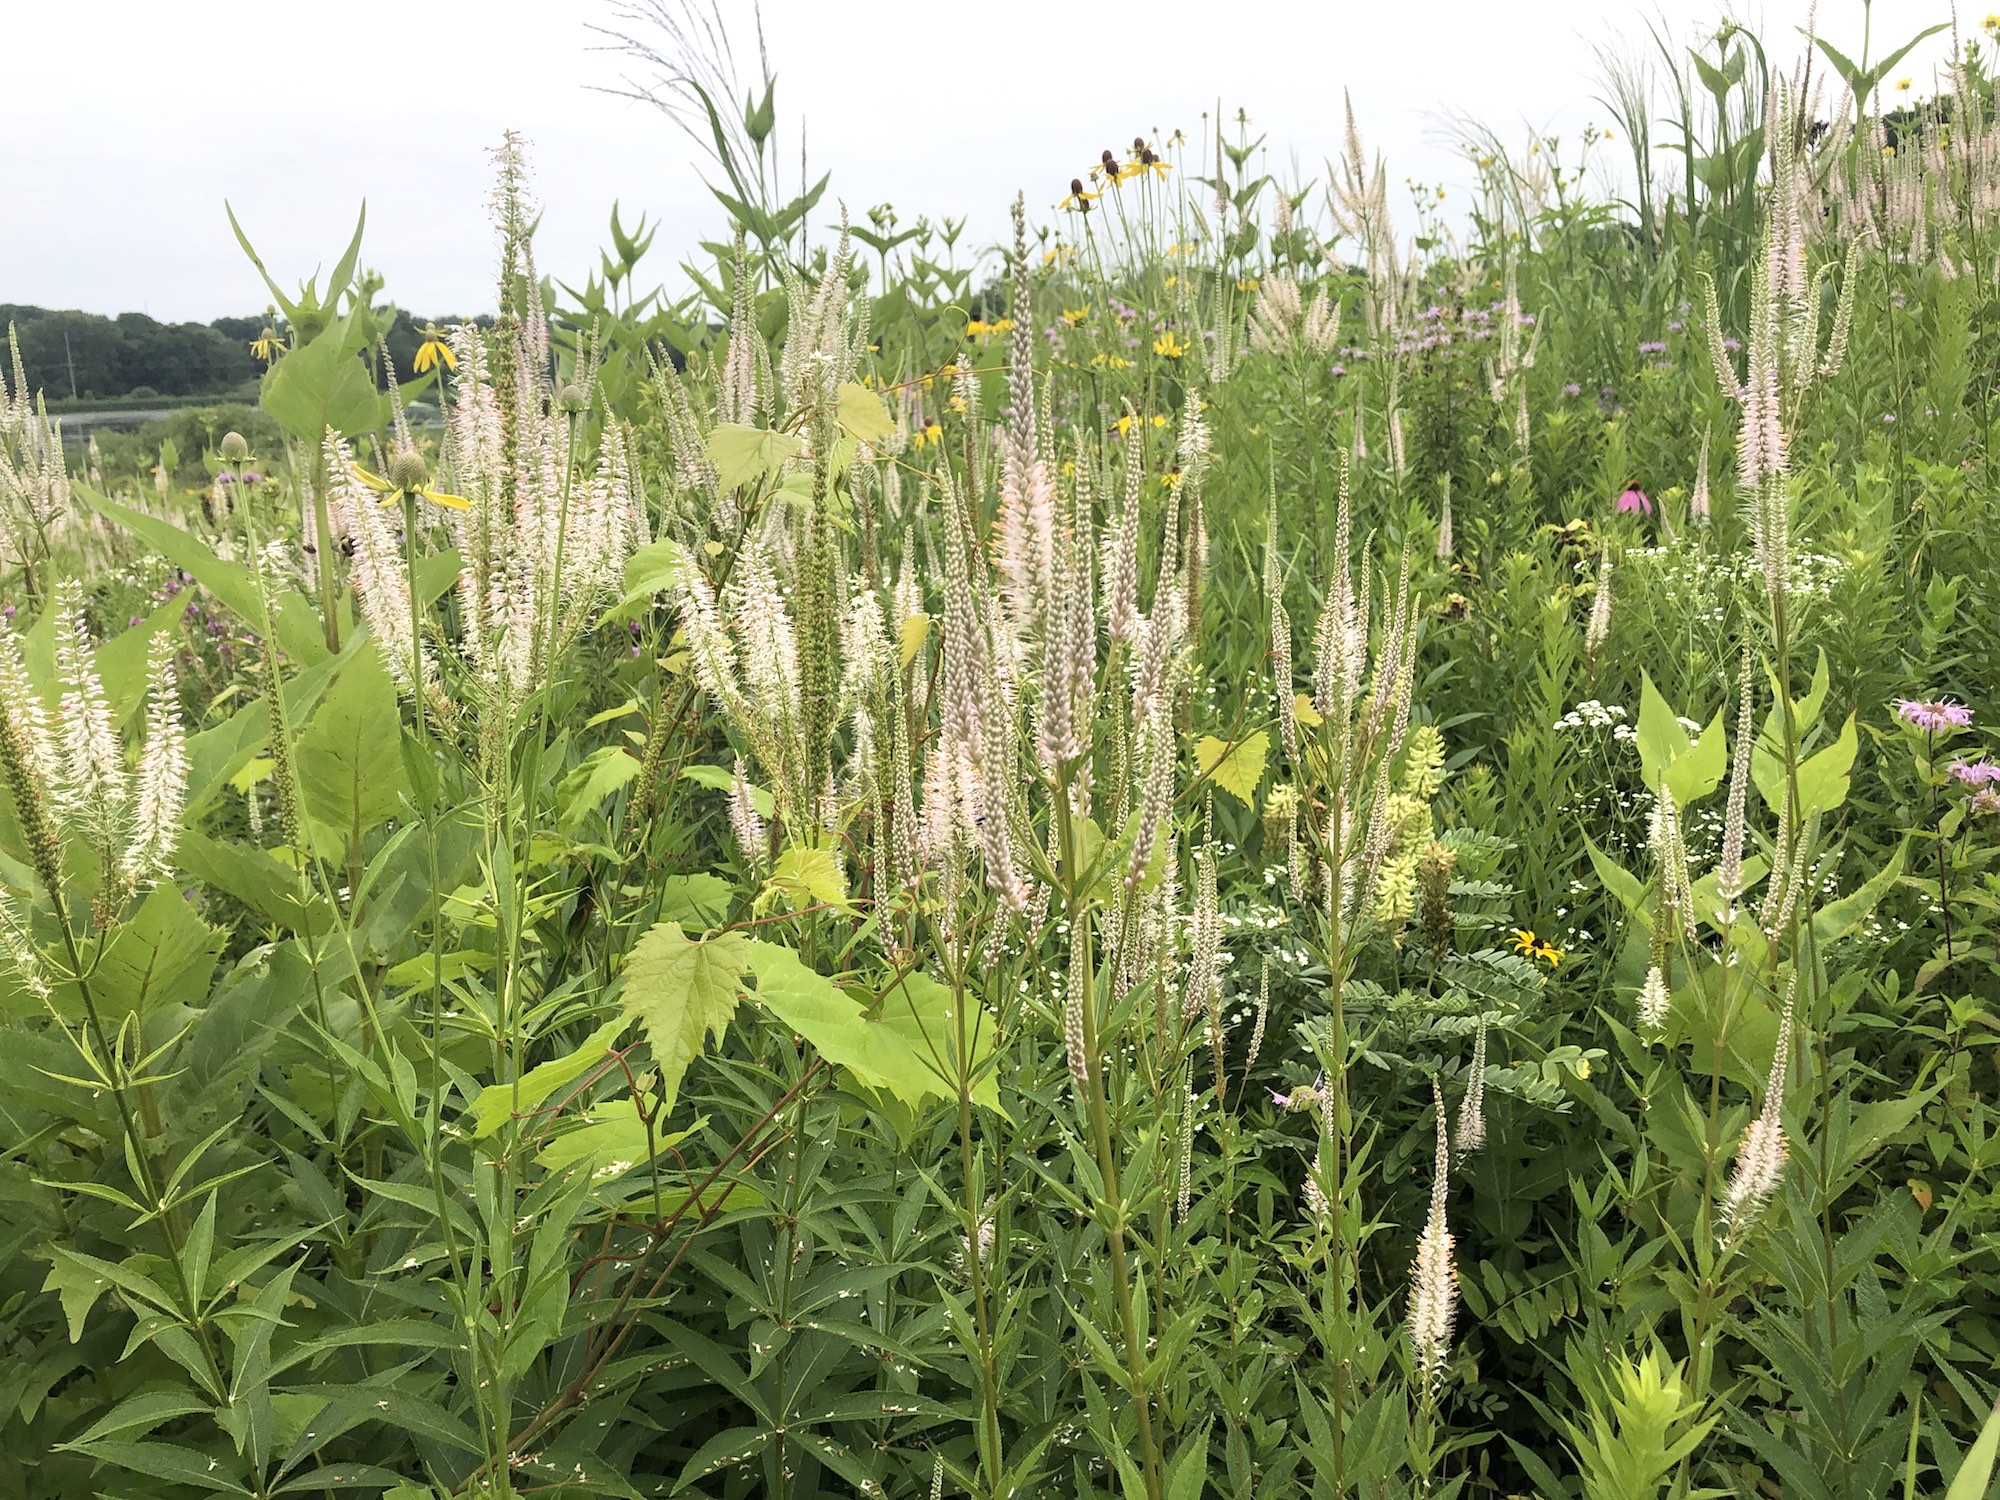 Culver's Root overlooking Dawley Conservancy in Madison, Wisconsin on July 21, 2021.